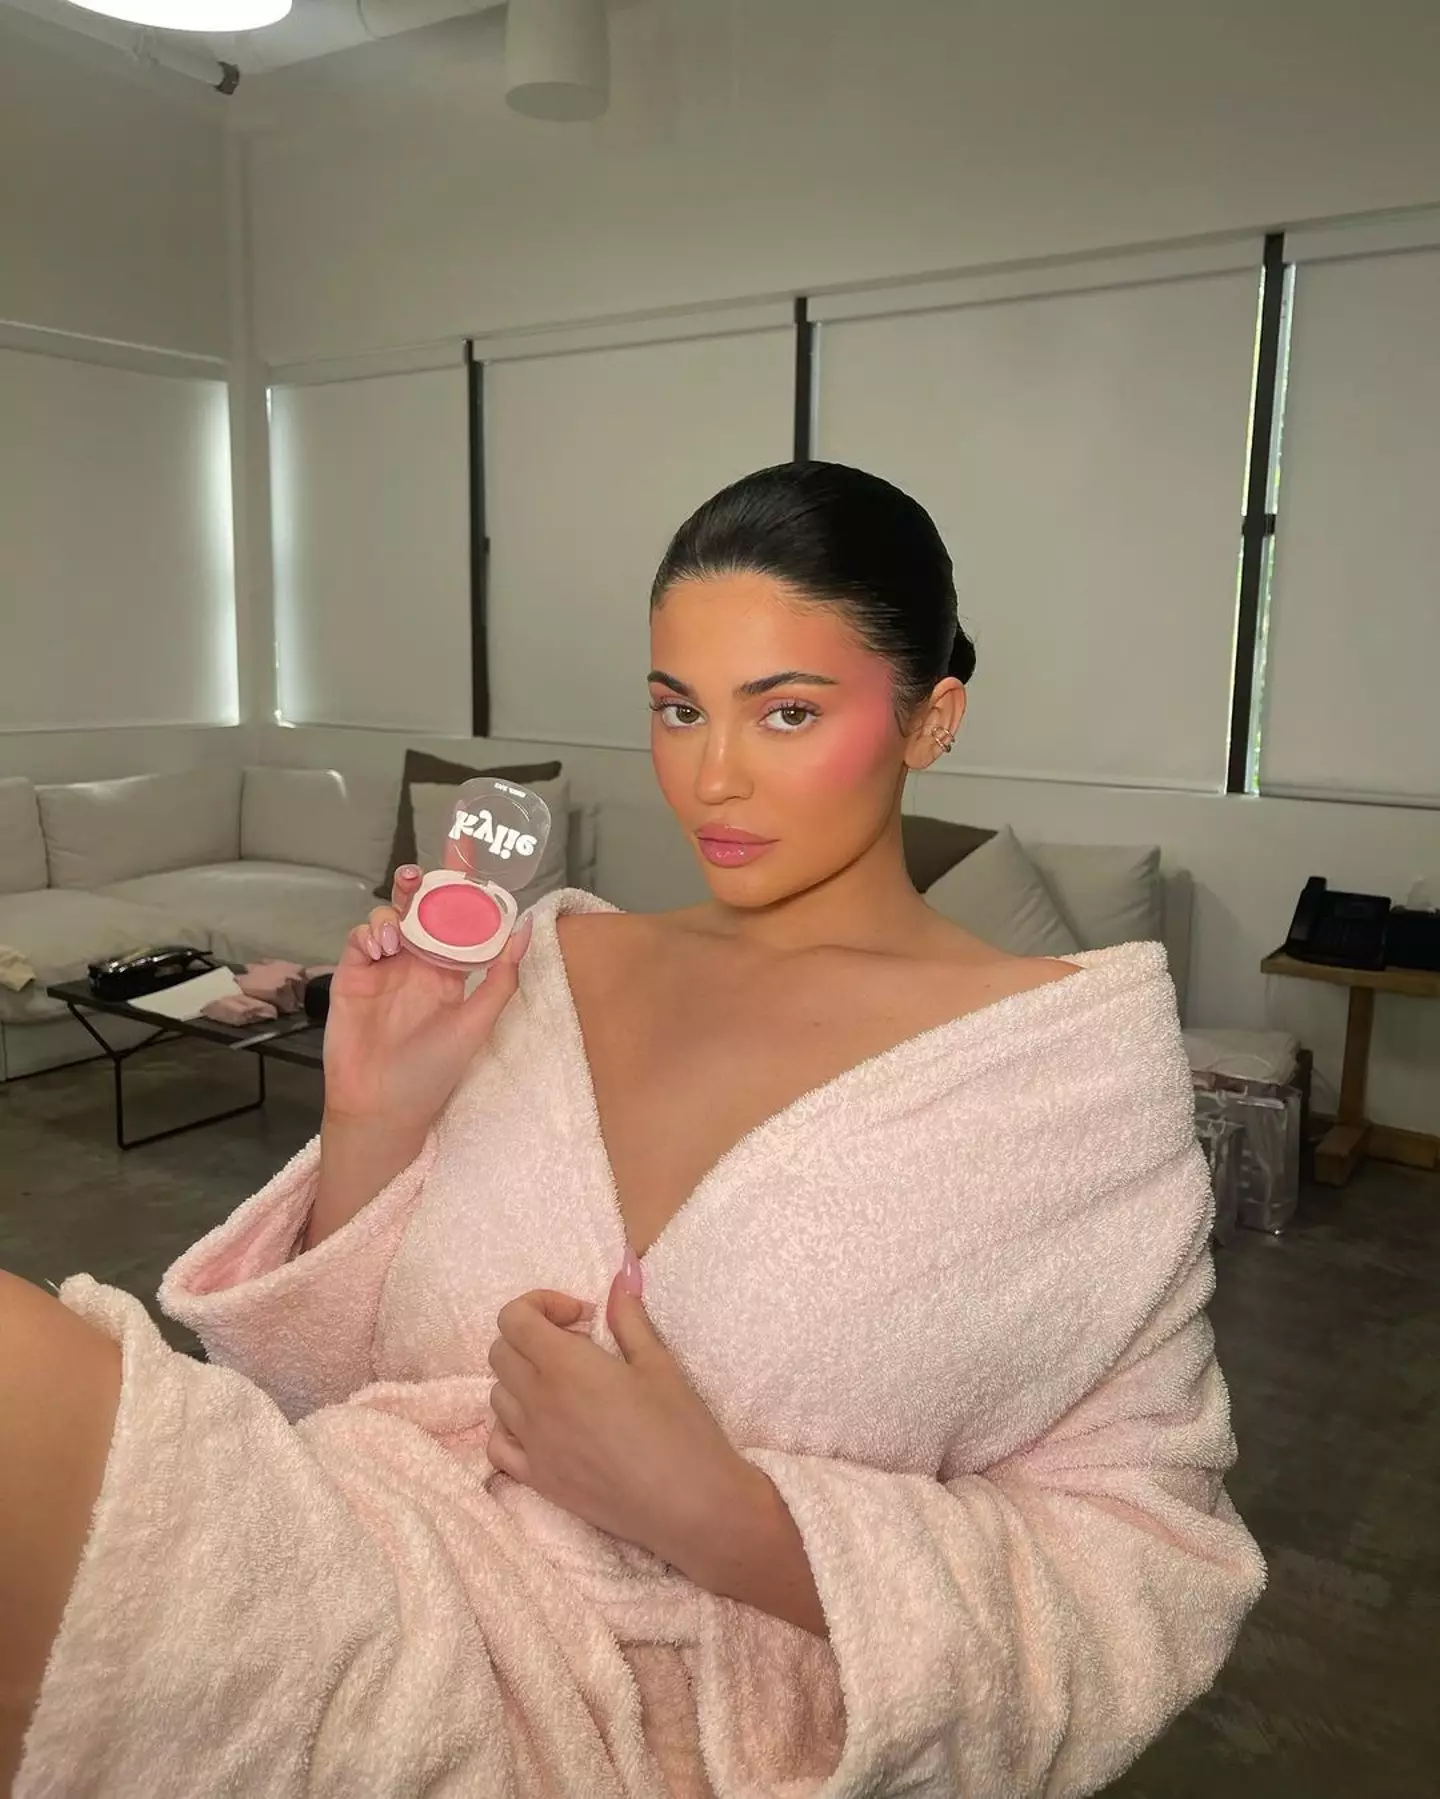 Kylie Jenner posing with a product from Kylie Cosmetics.